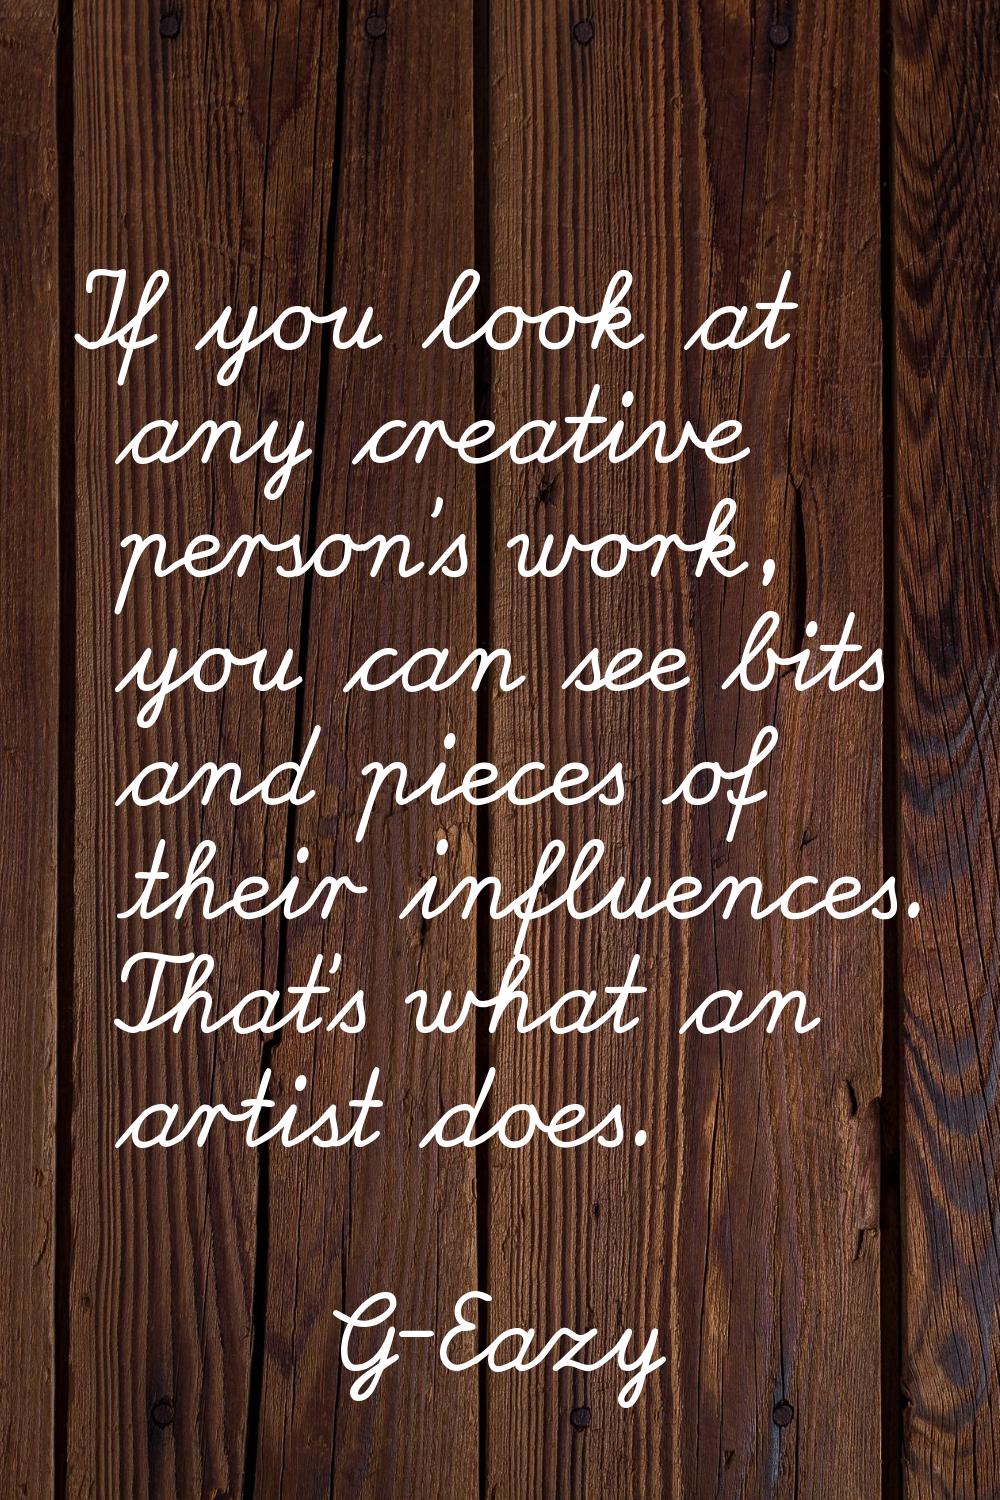 If you look at any creative person's work, you can see bits and pieces of their influences. That's 